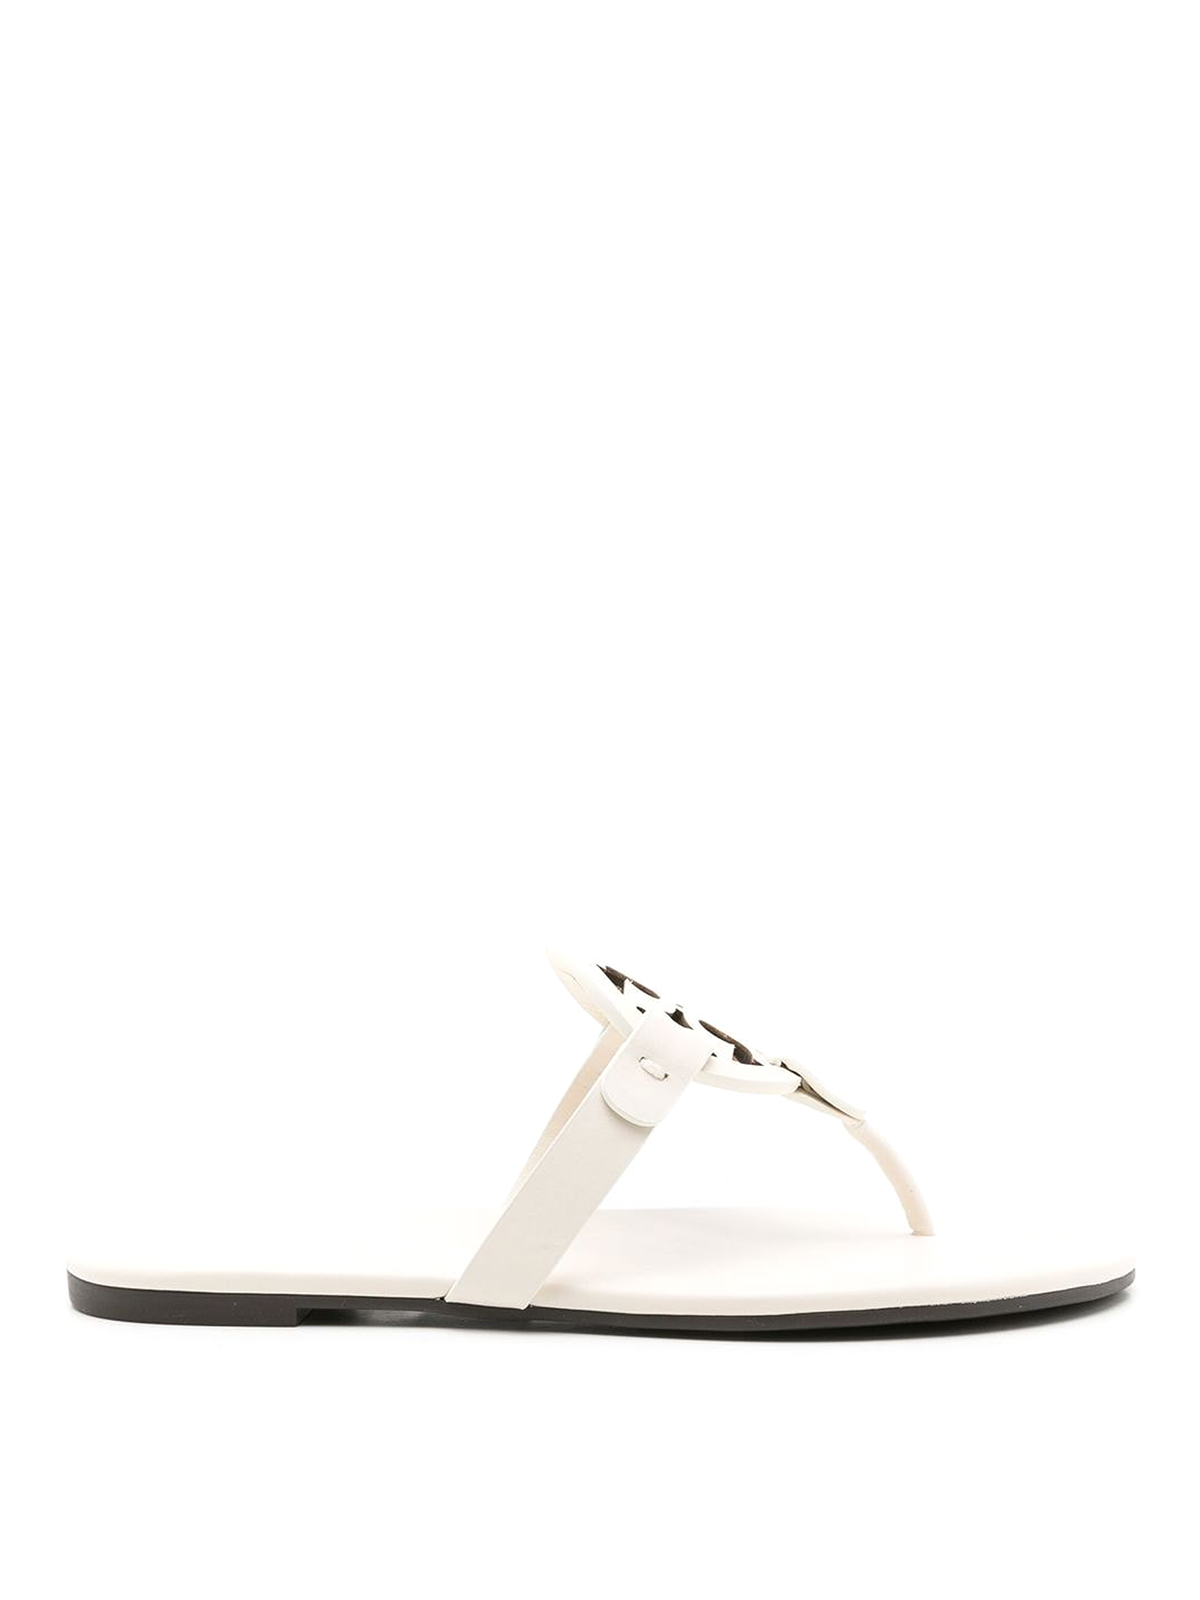 Tory Burch Miller Leather Thong Sandals In White